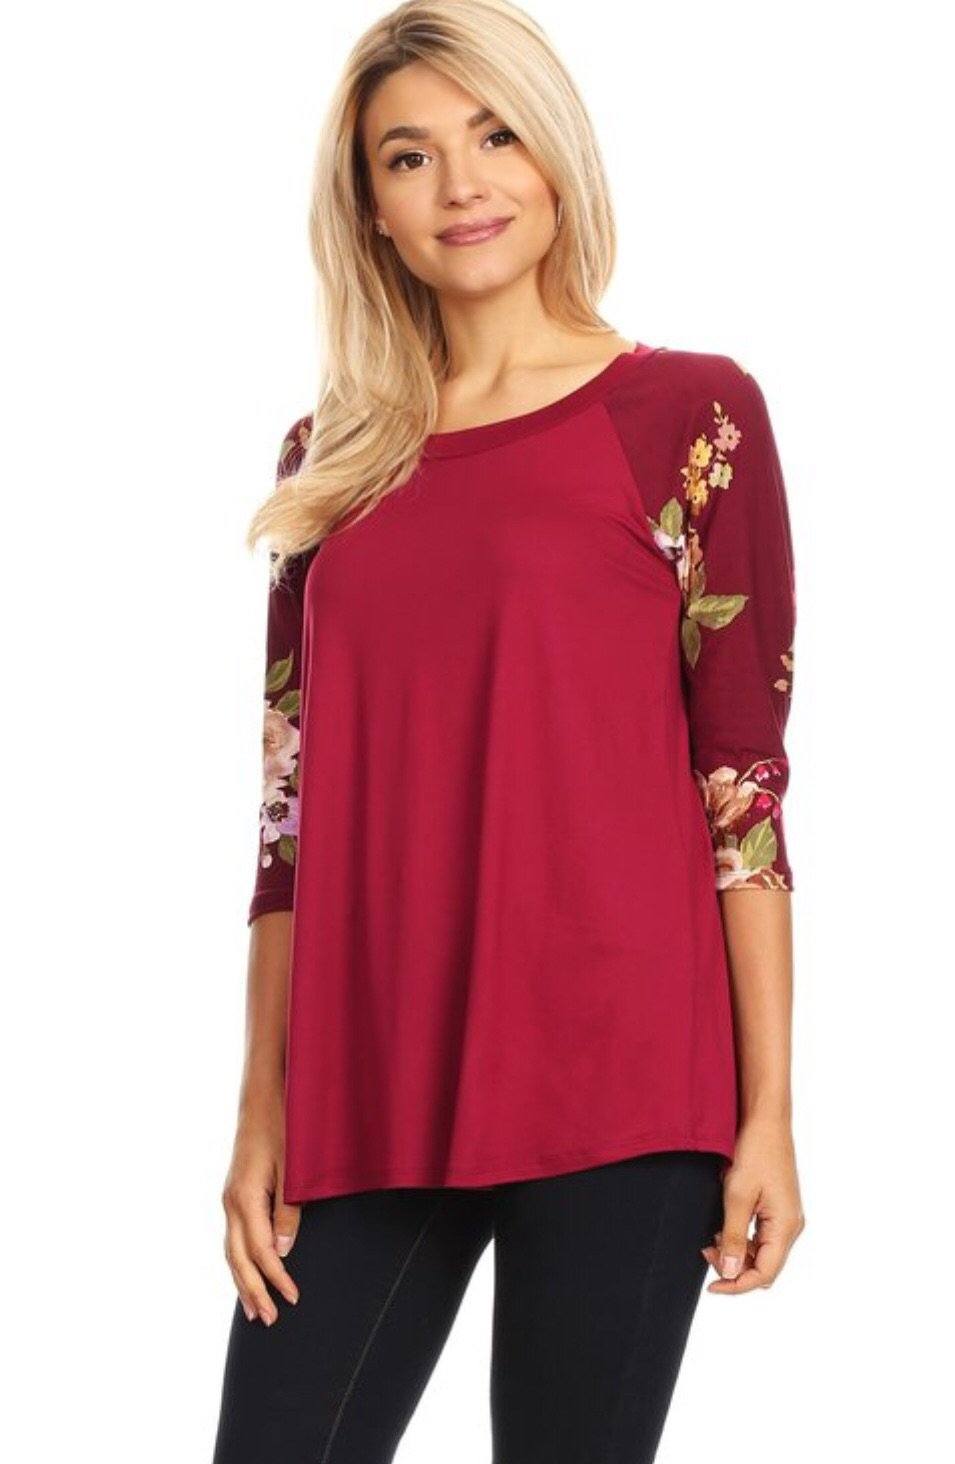 Women's Maroon Raglan Tunic Top Floral Shirt: S/M/L Tunics MomMe and More 